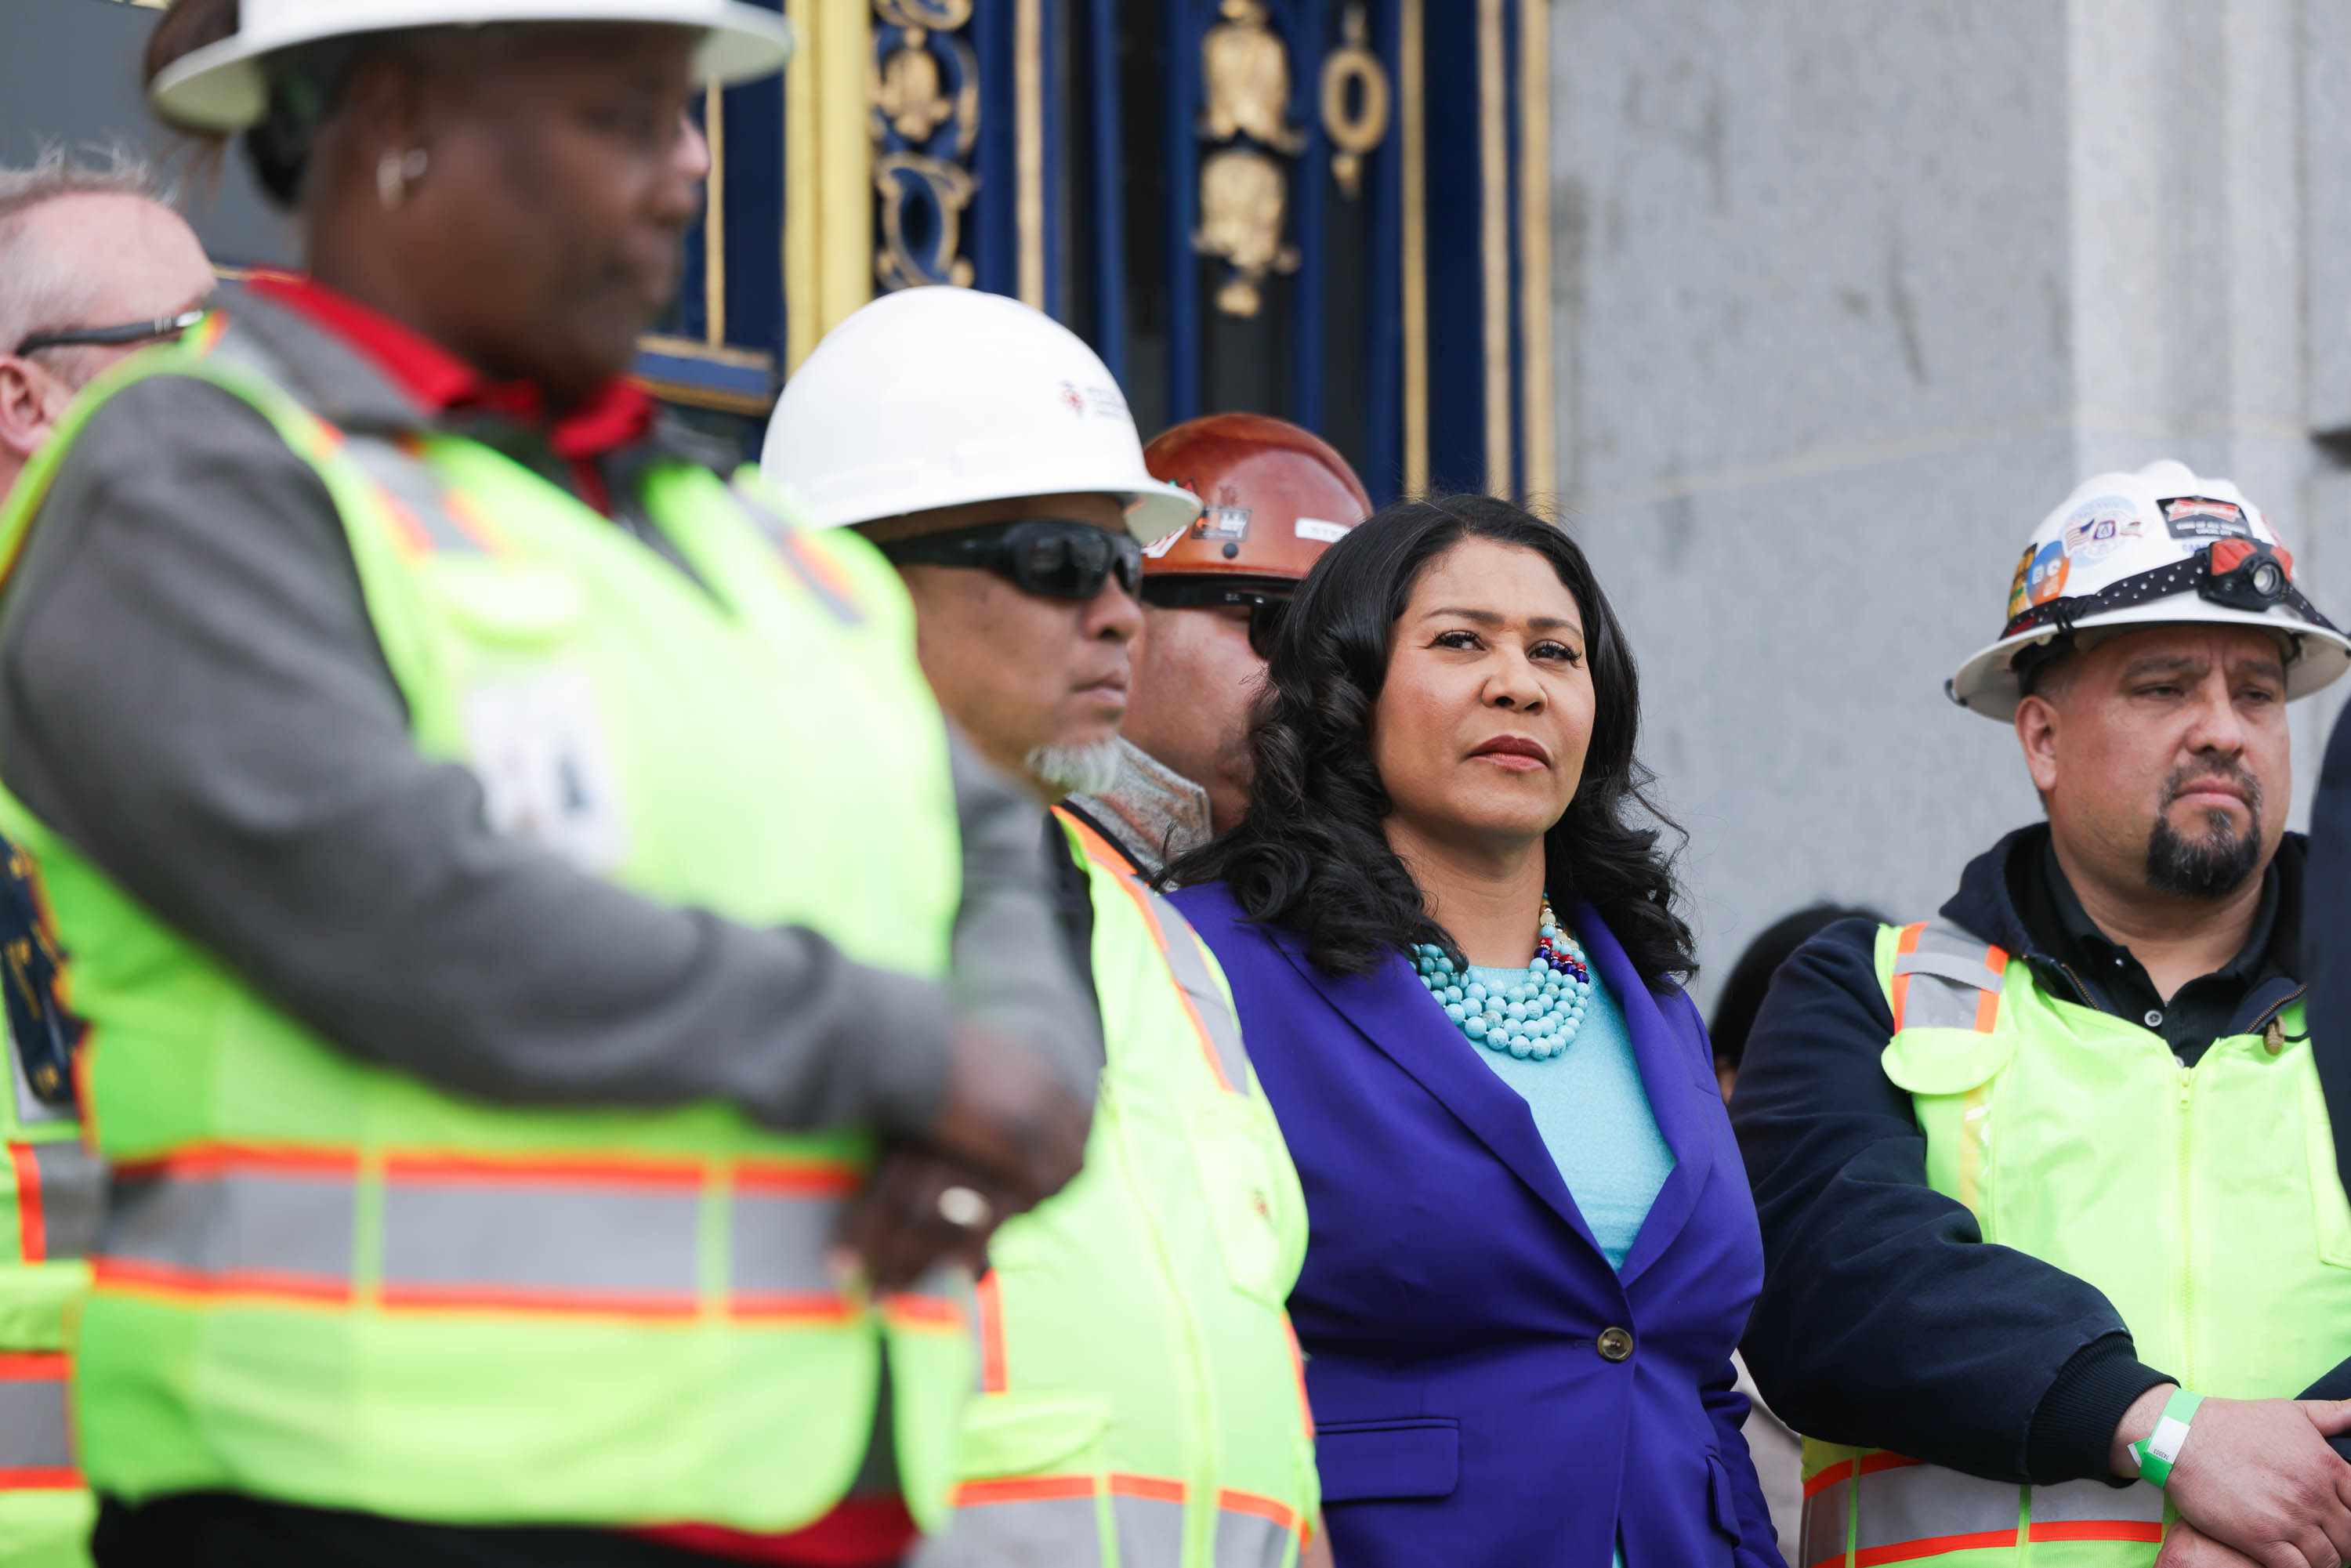 A group of people in safety vests and hard hats, with a woman in a purple blazer standing out at the center.